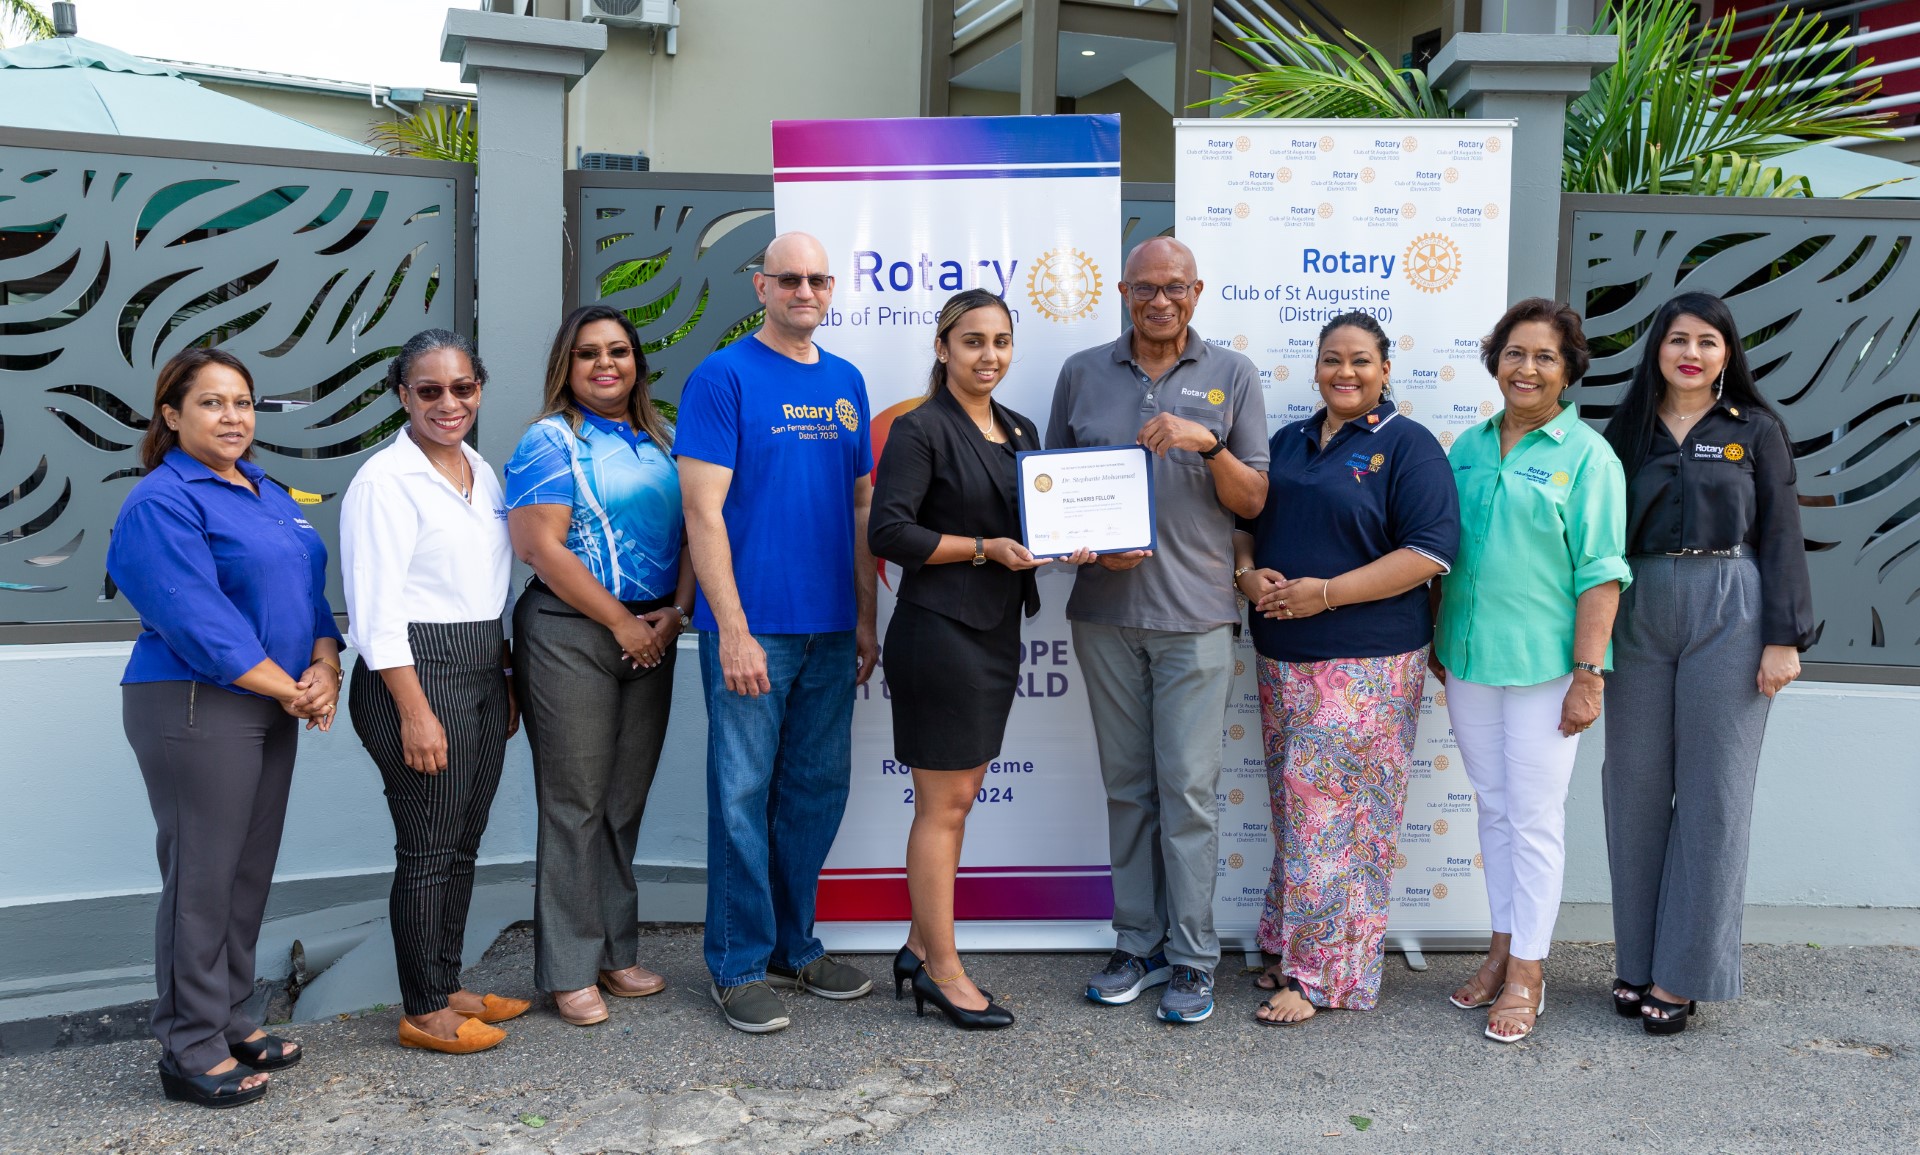 UWI Researcher on PCOS honoured with Rotary Paul Harris Fellow Award